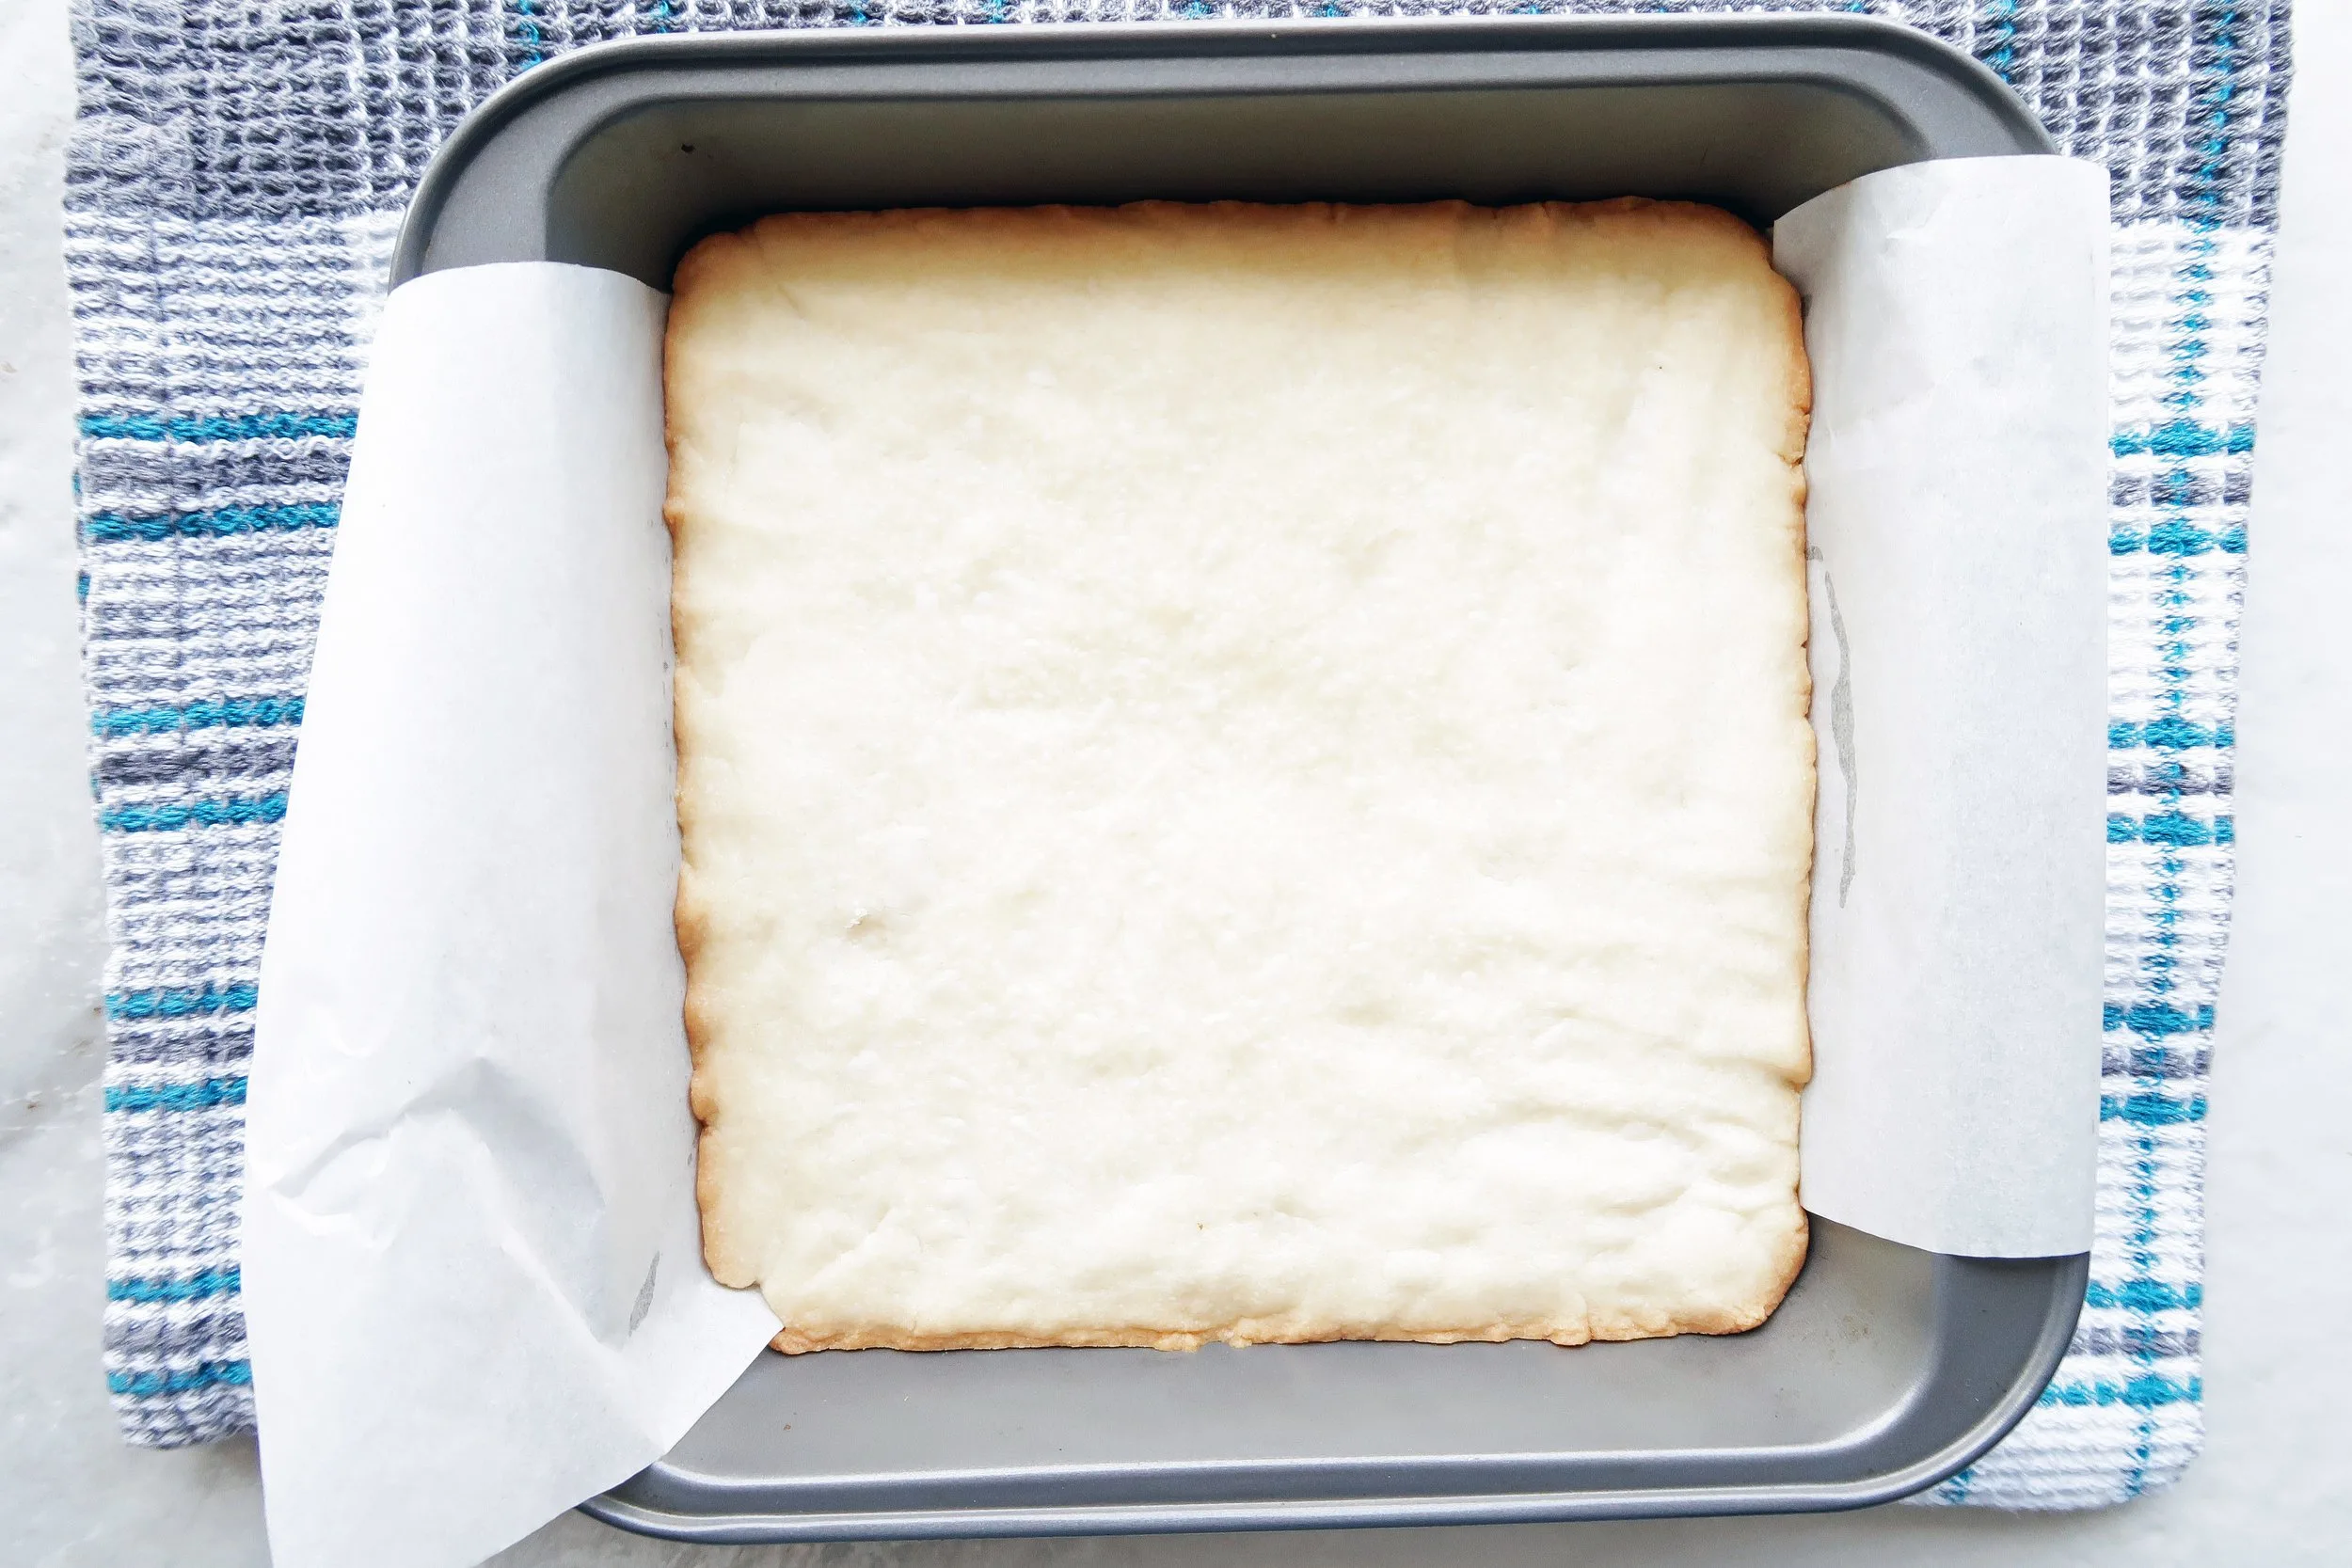 Baked shortbread in a parchment paper-lined square baking pan.